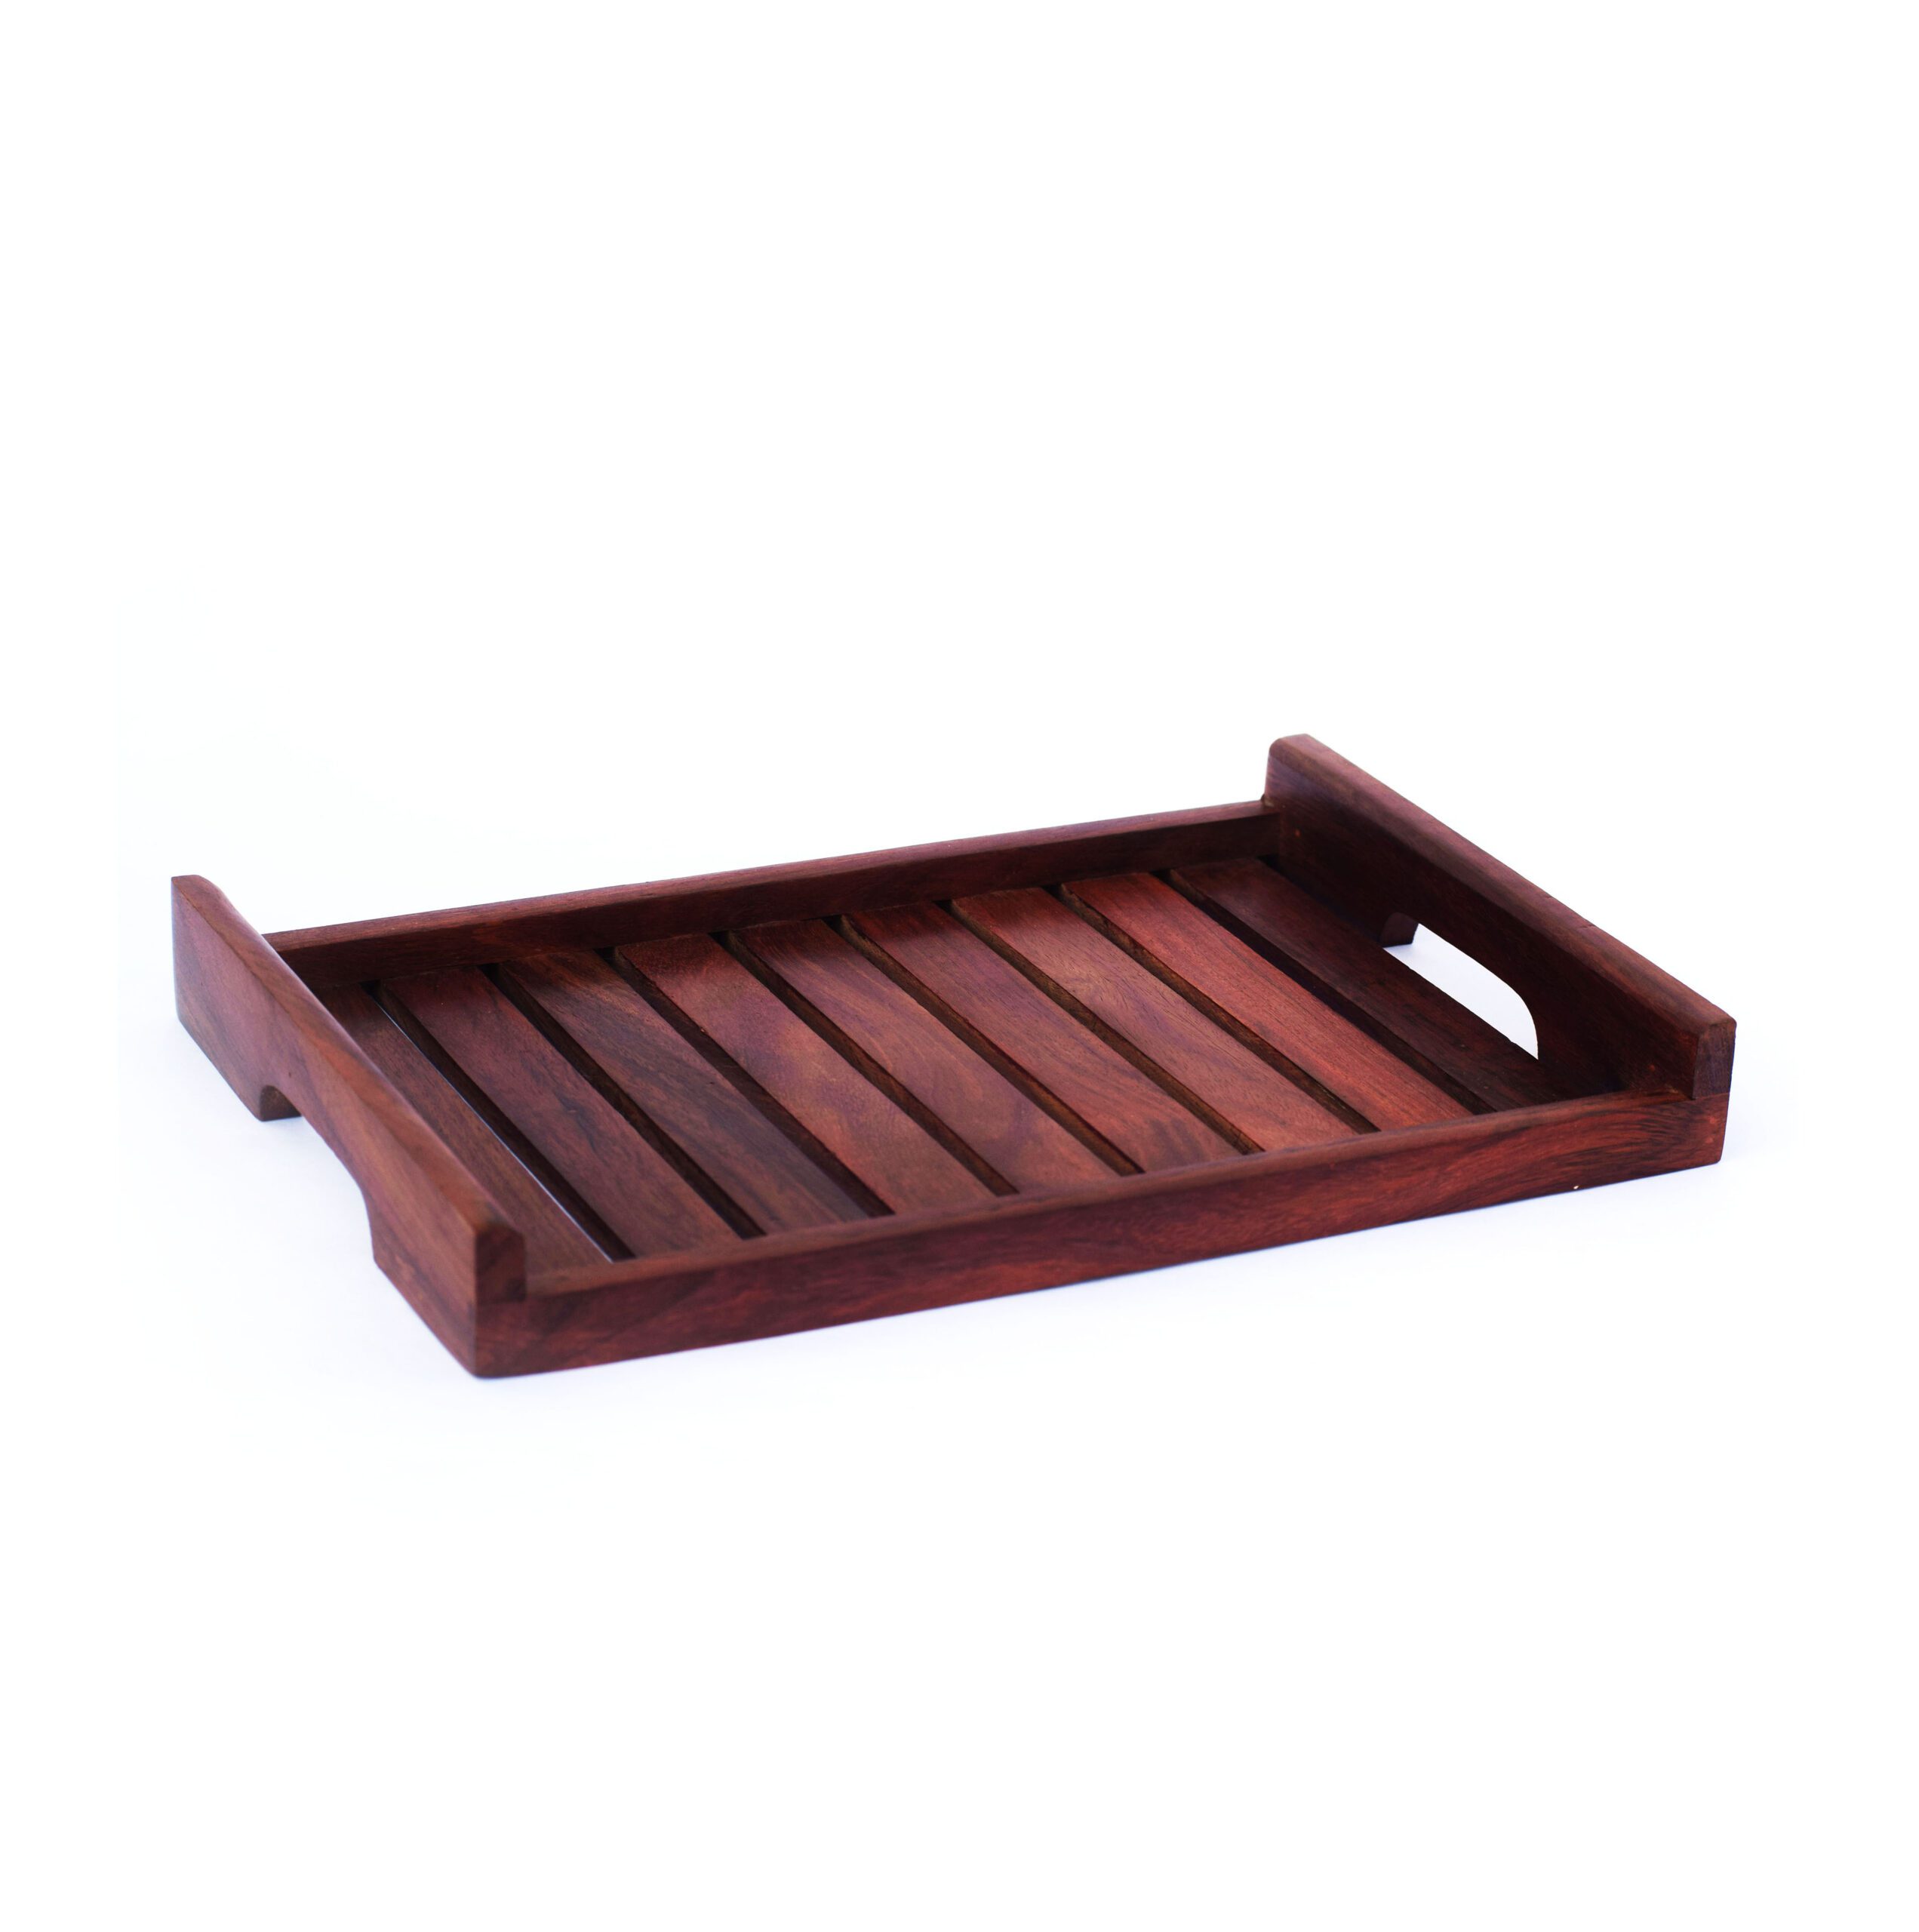 Handcrafted Wood Serving Tray with Handles  | Trays for Coffee Table | Perfect Trendy Breakfast Tray